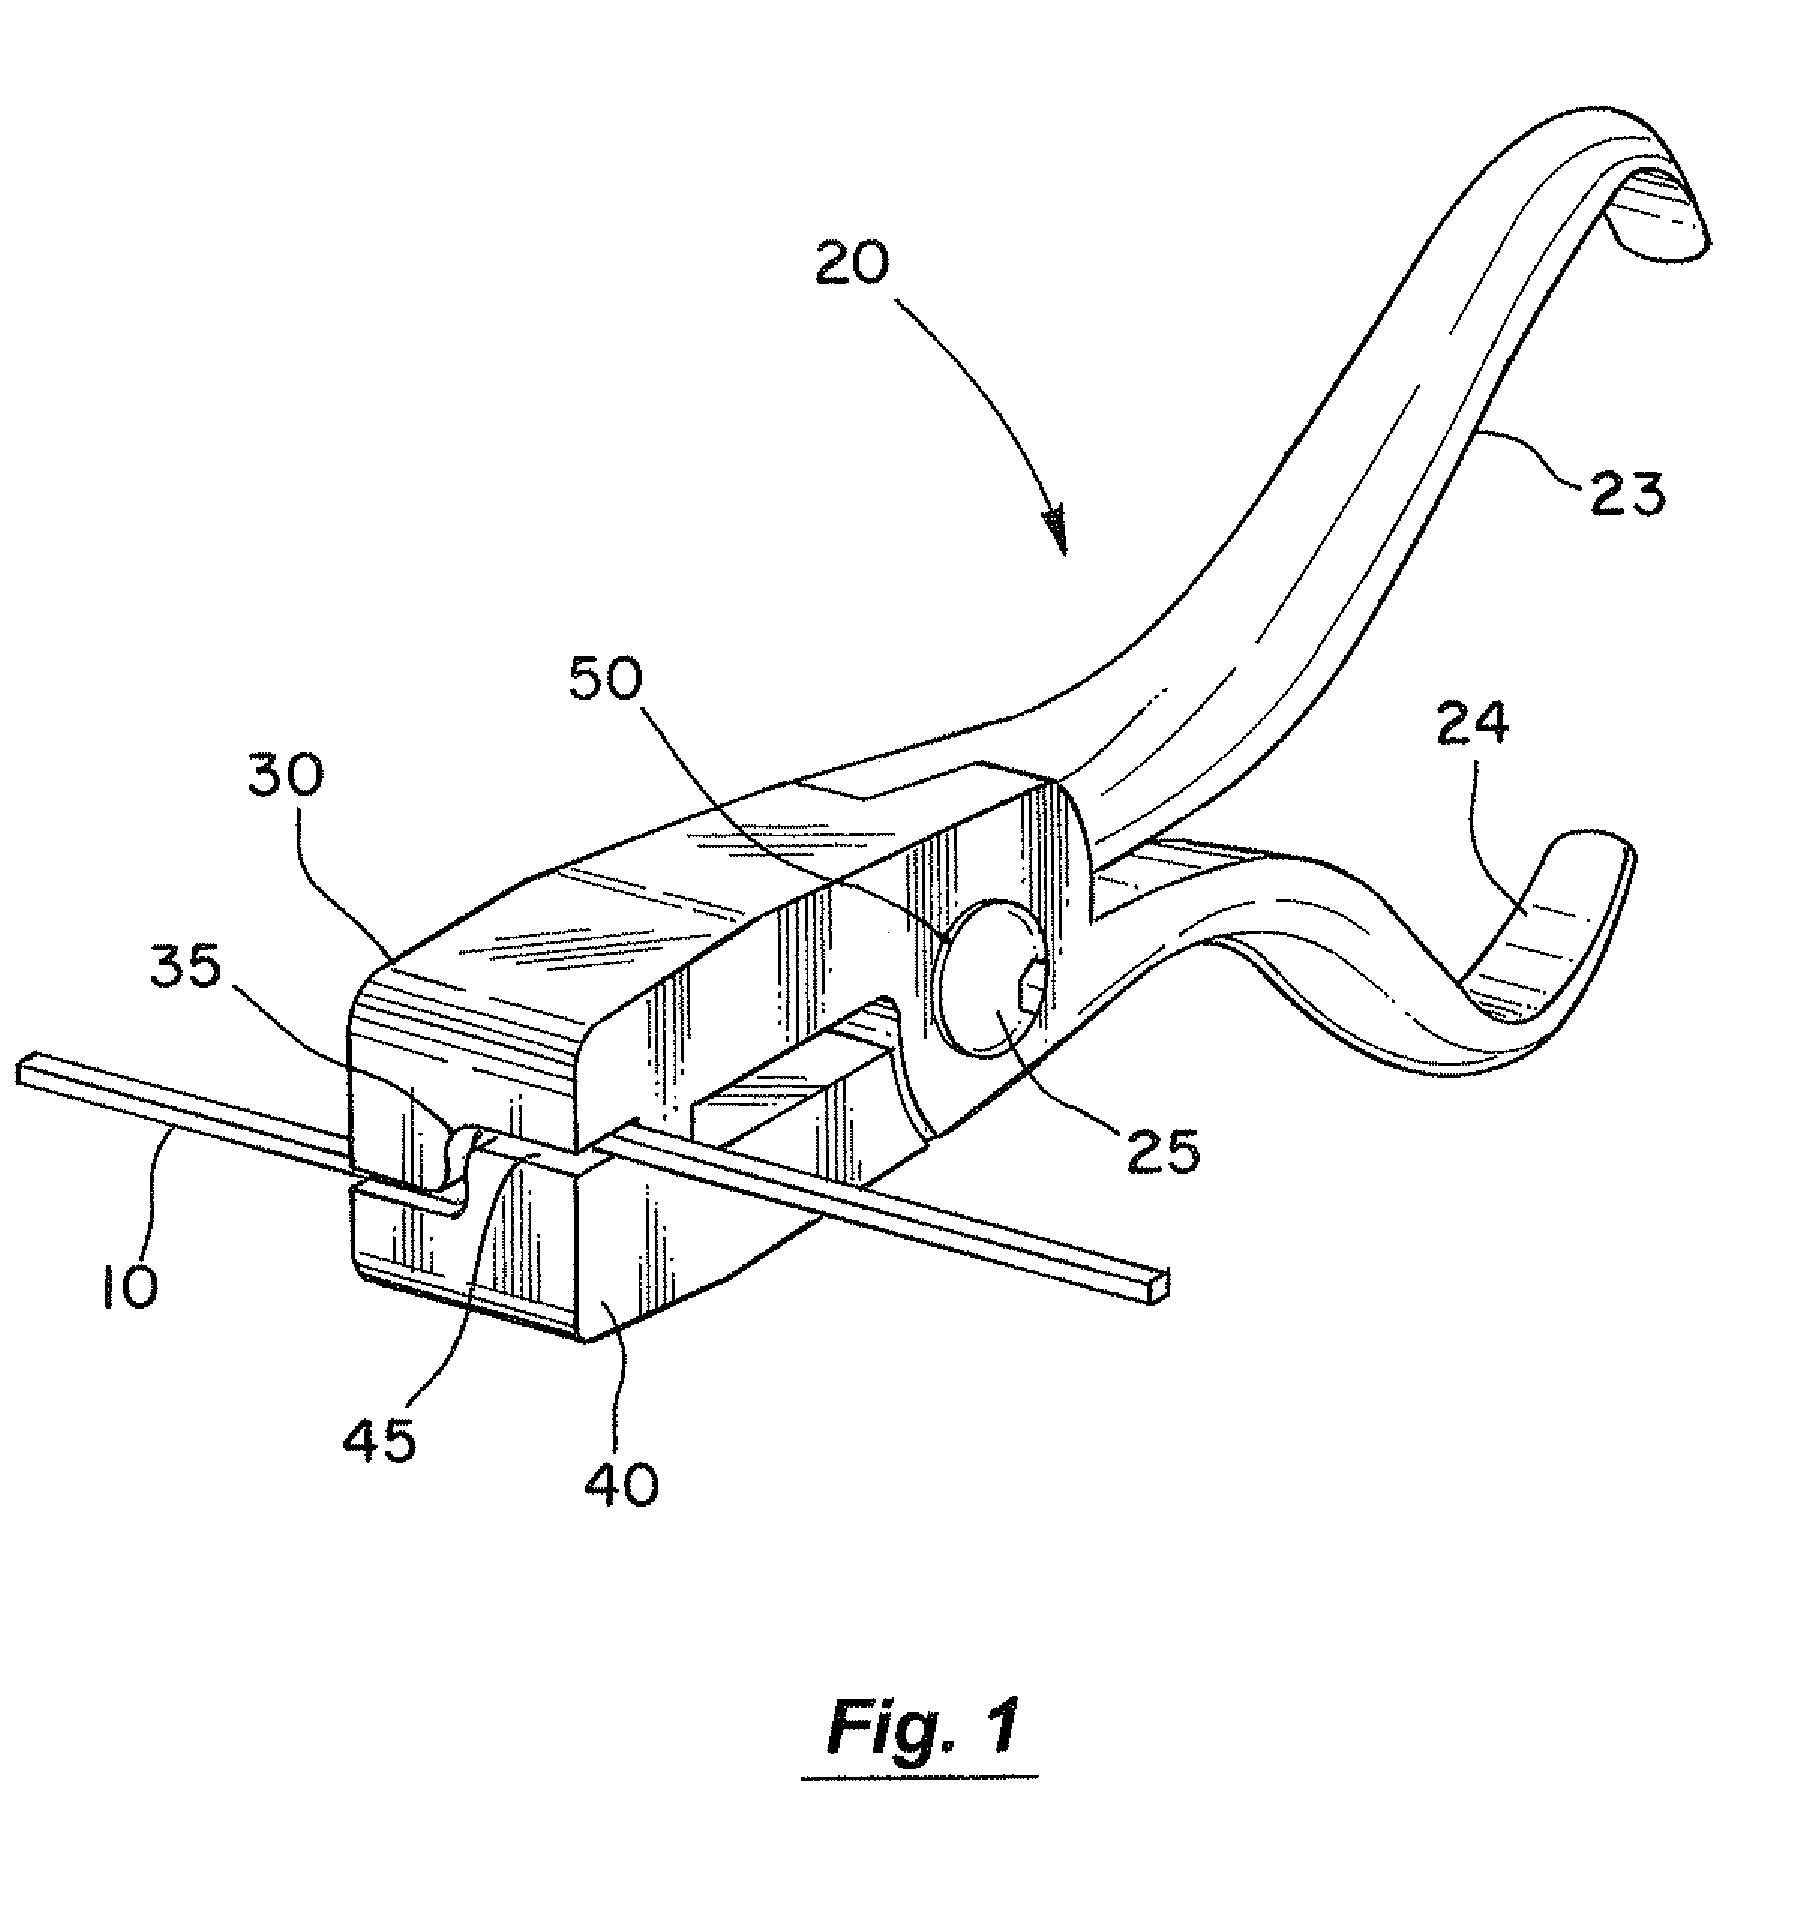 Pliers for forming orthodontic wires